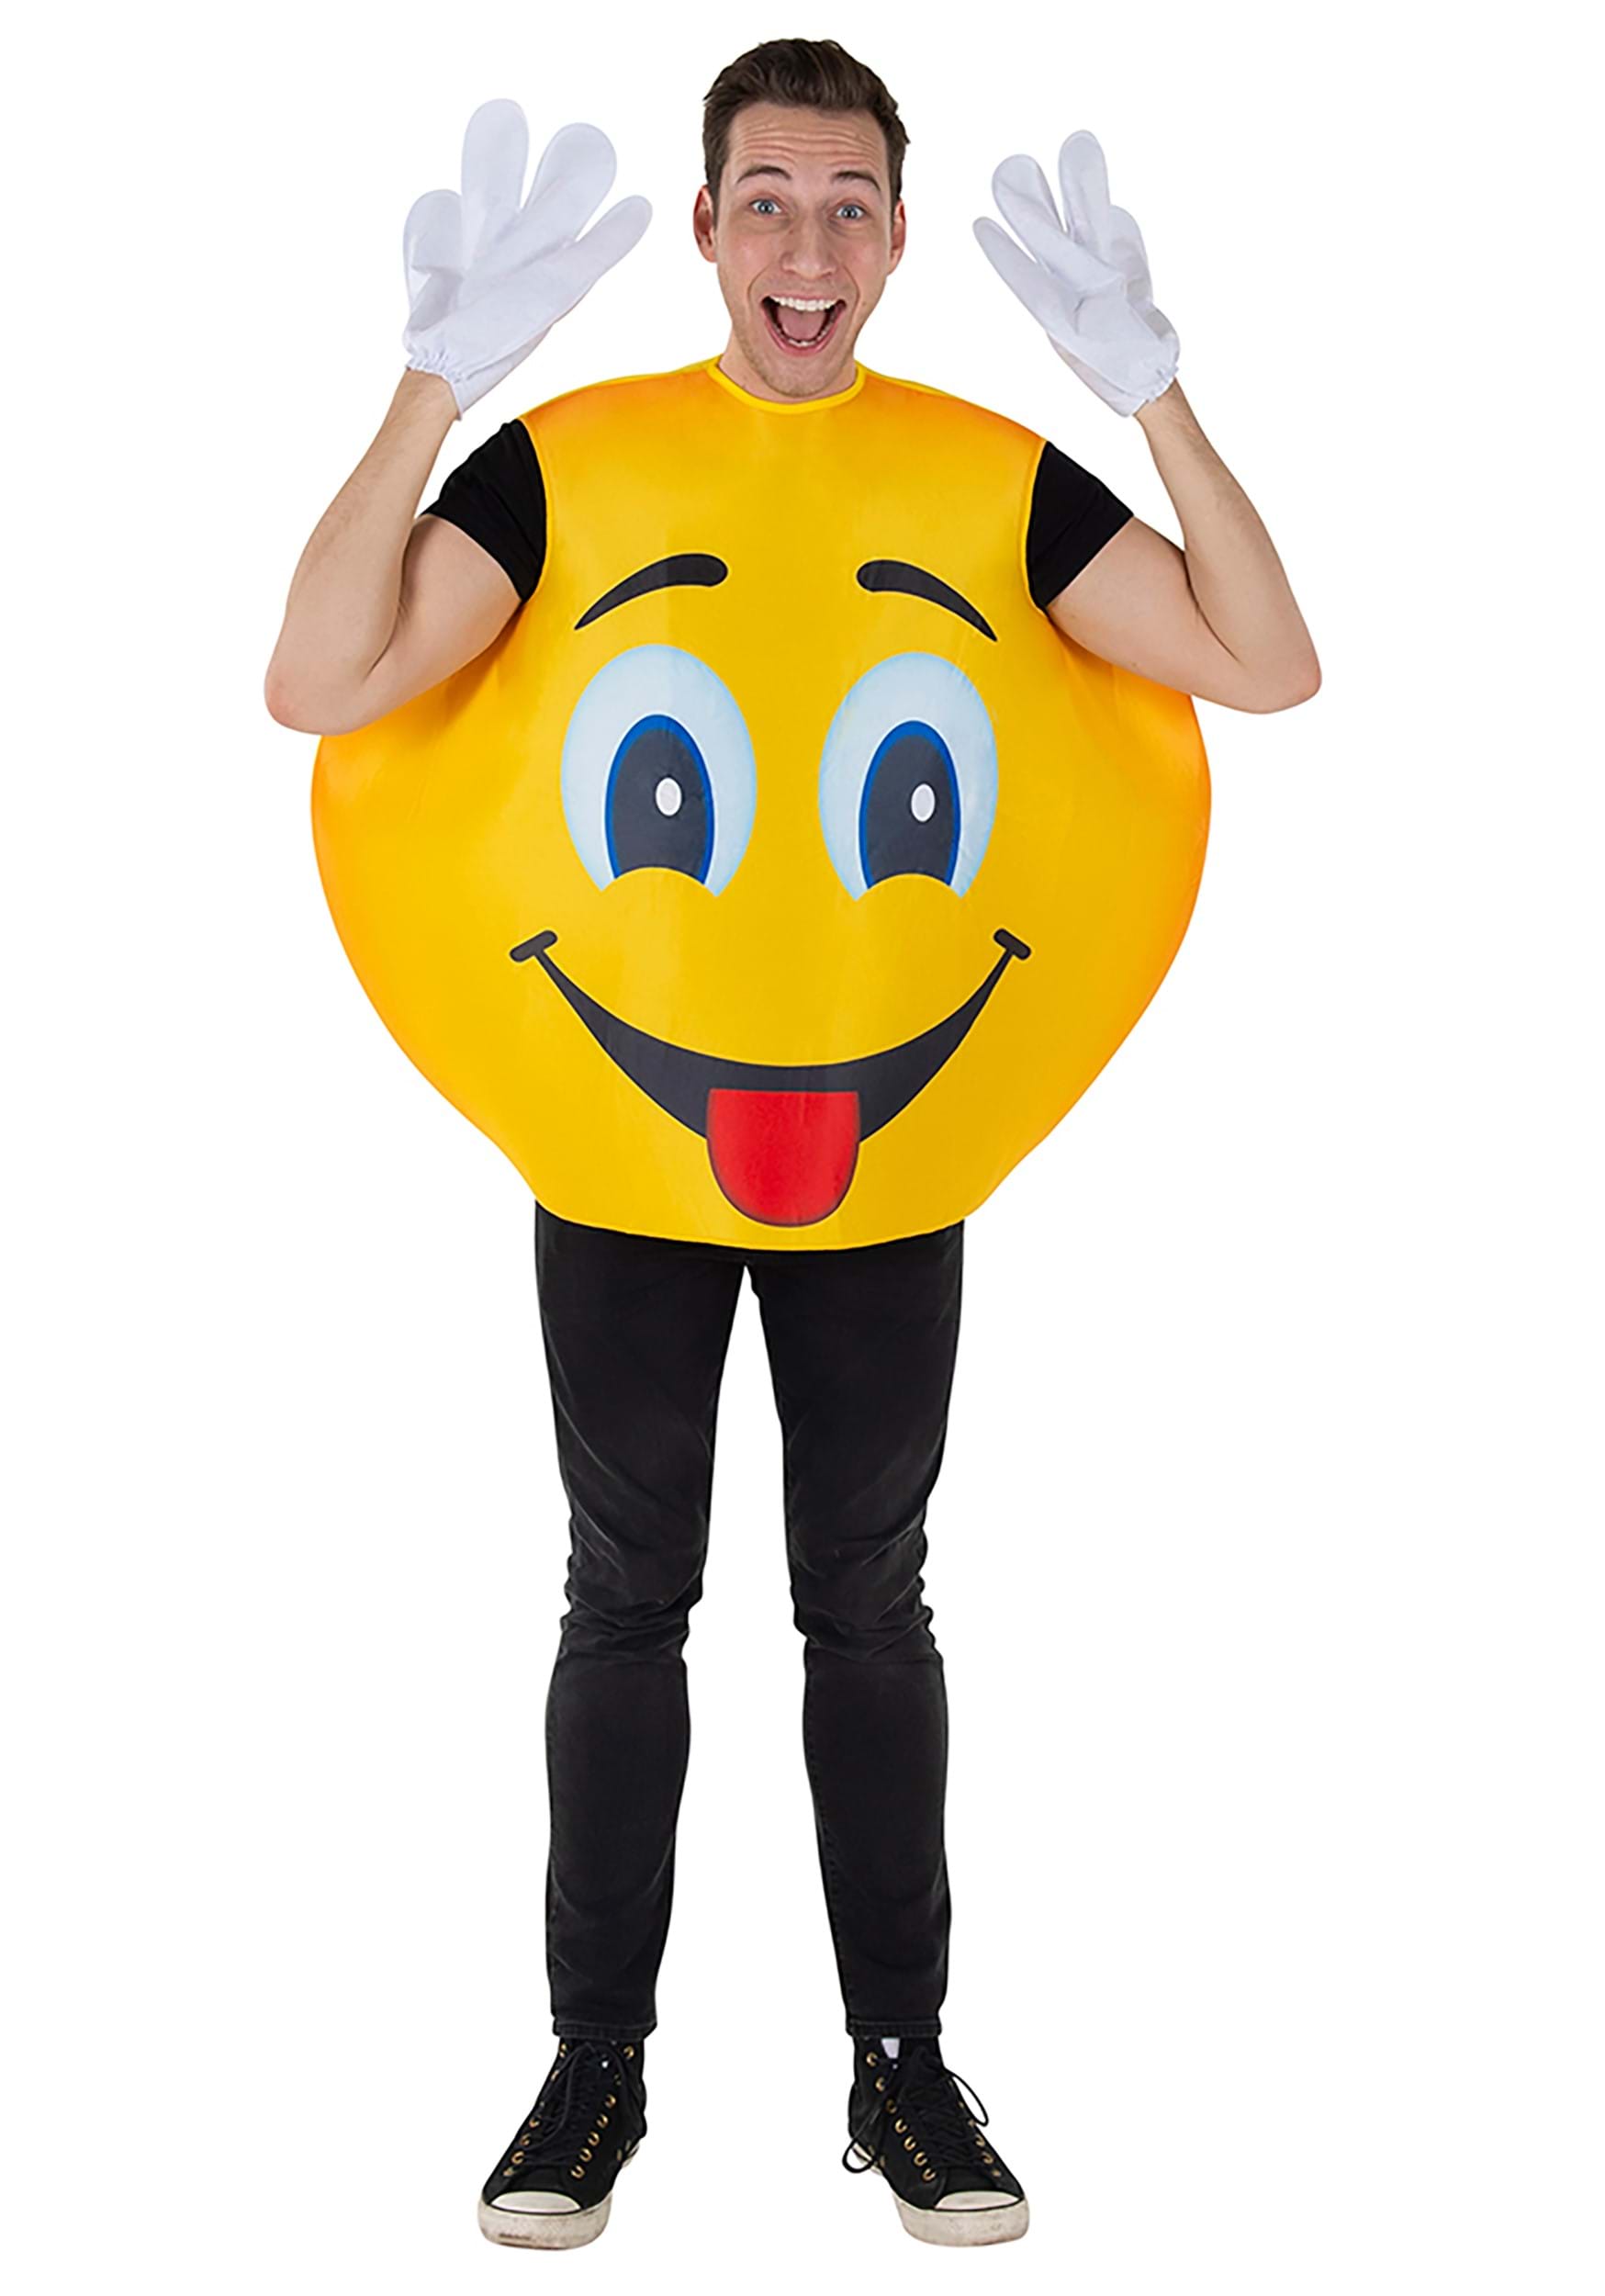 EMOJIS YOU WILL LIKE Outfit